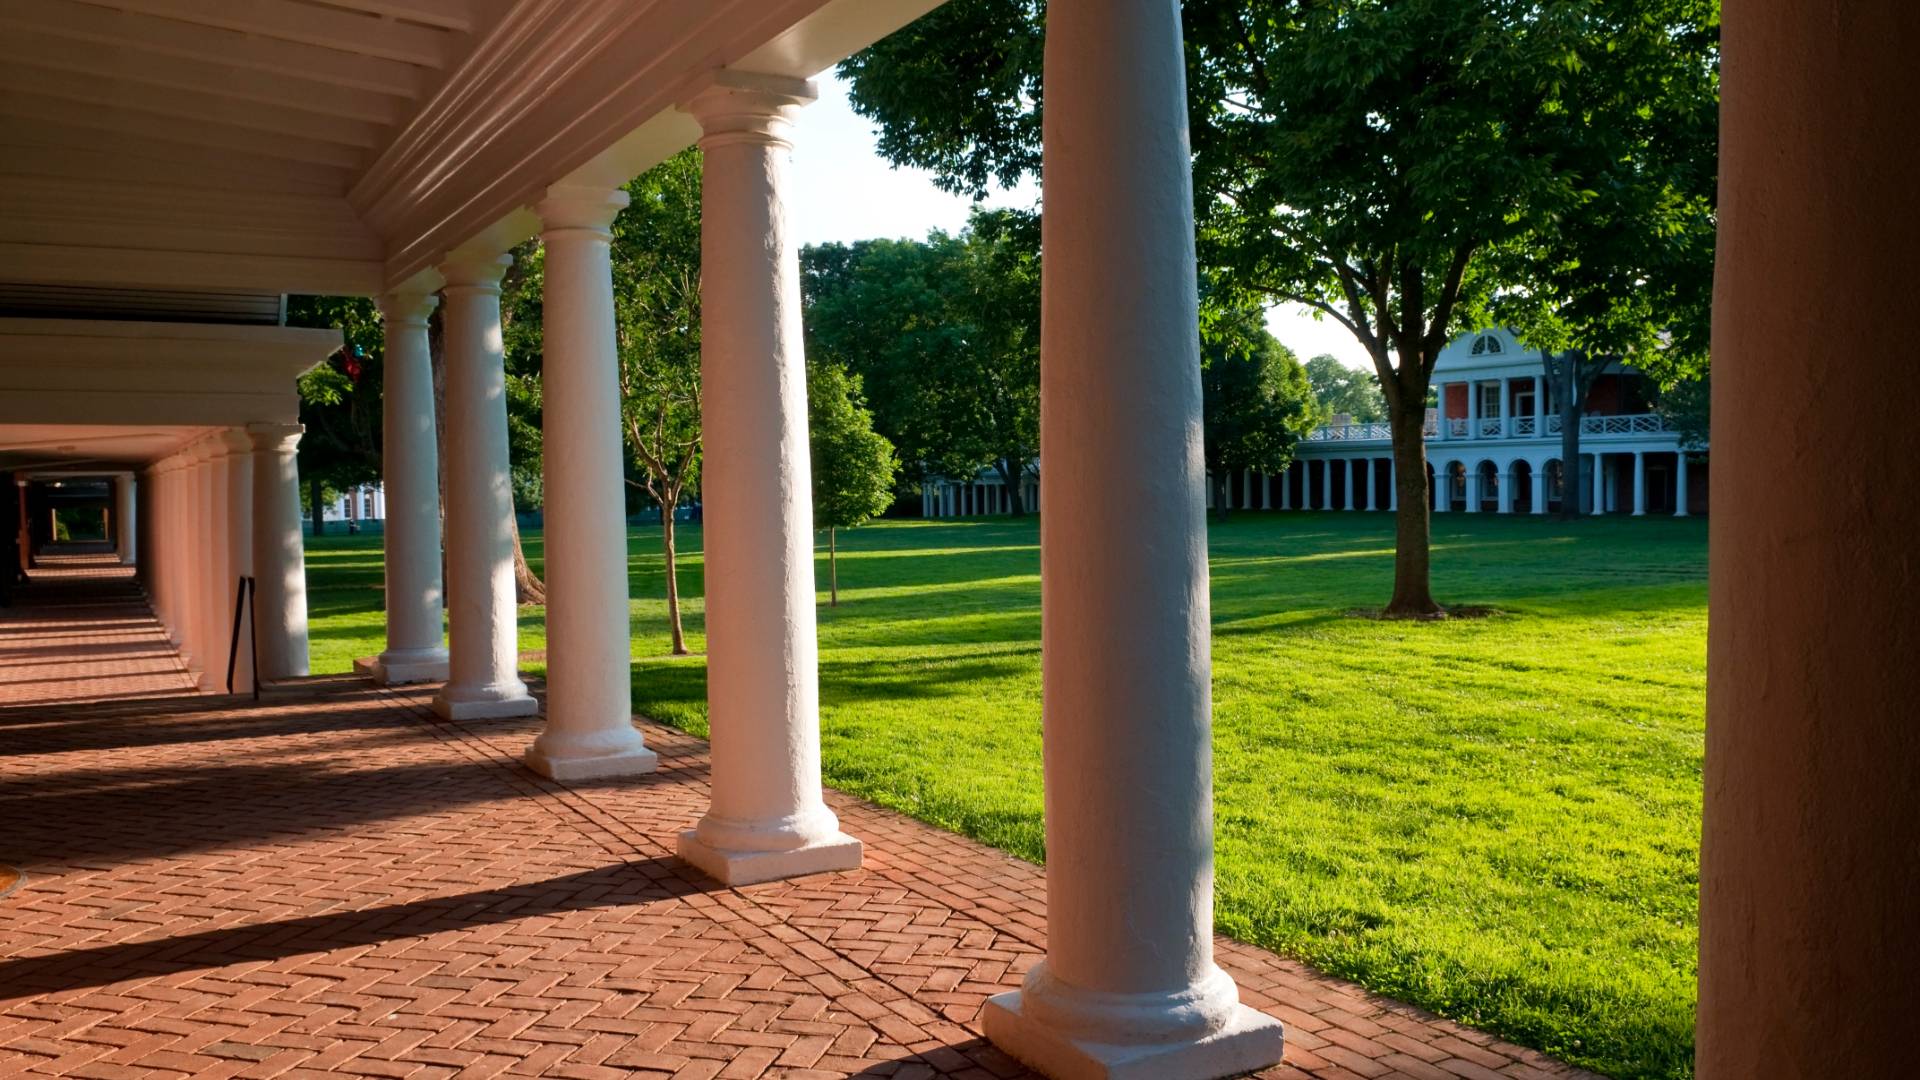 The Lawn at University of Virginia